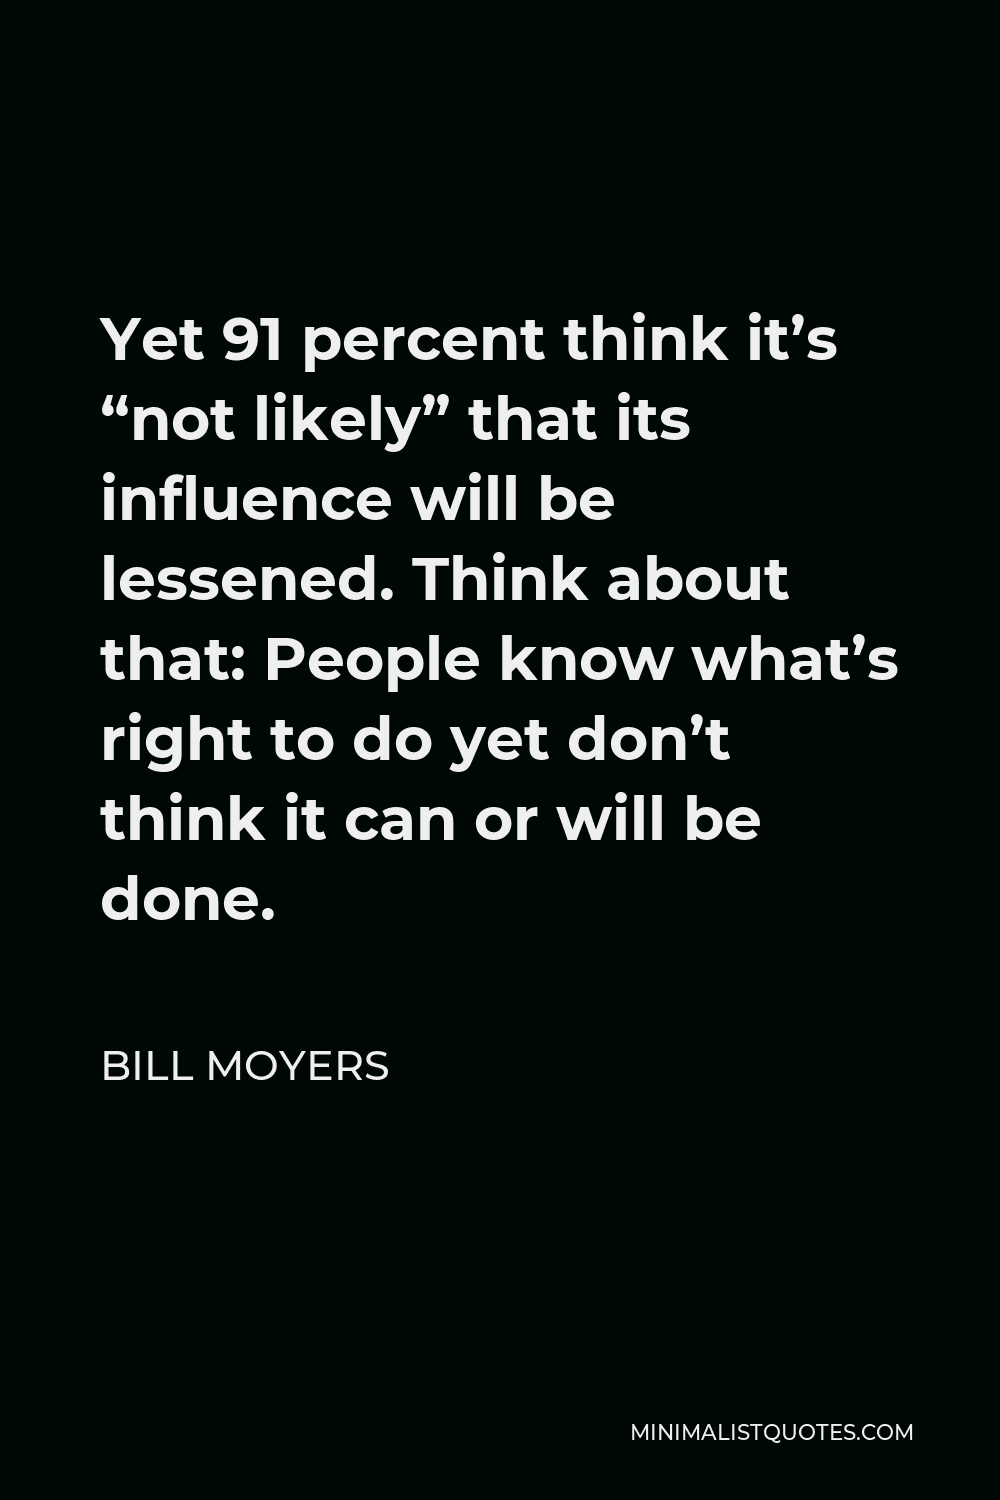 Bill Moyers Quote - Yet 91 percent think it’s “not likely” that its influence will be lessened. Think about that: People know what’s right to do yet don’t think it can or will be done.